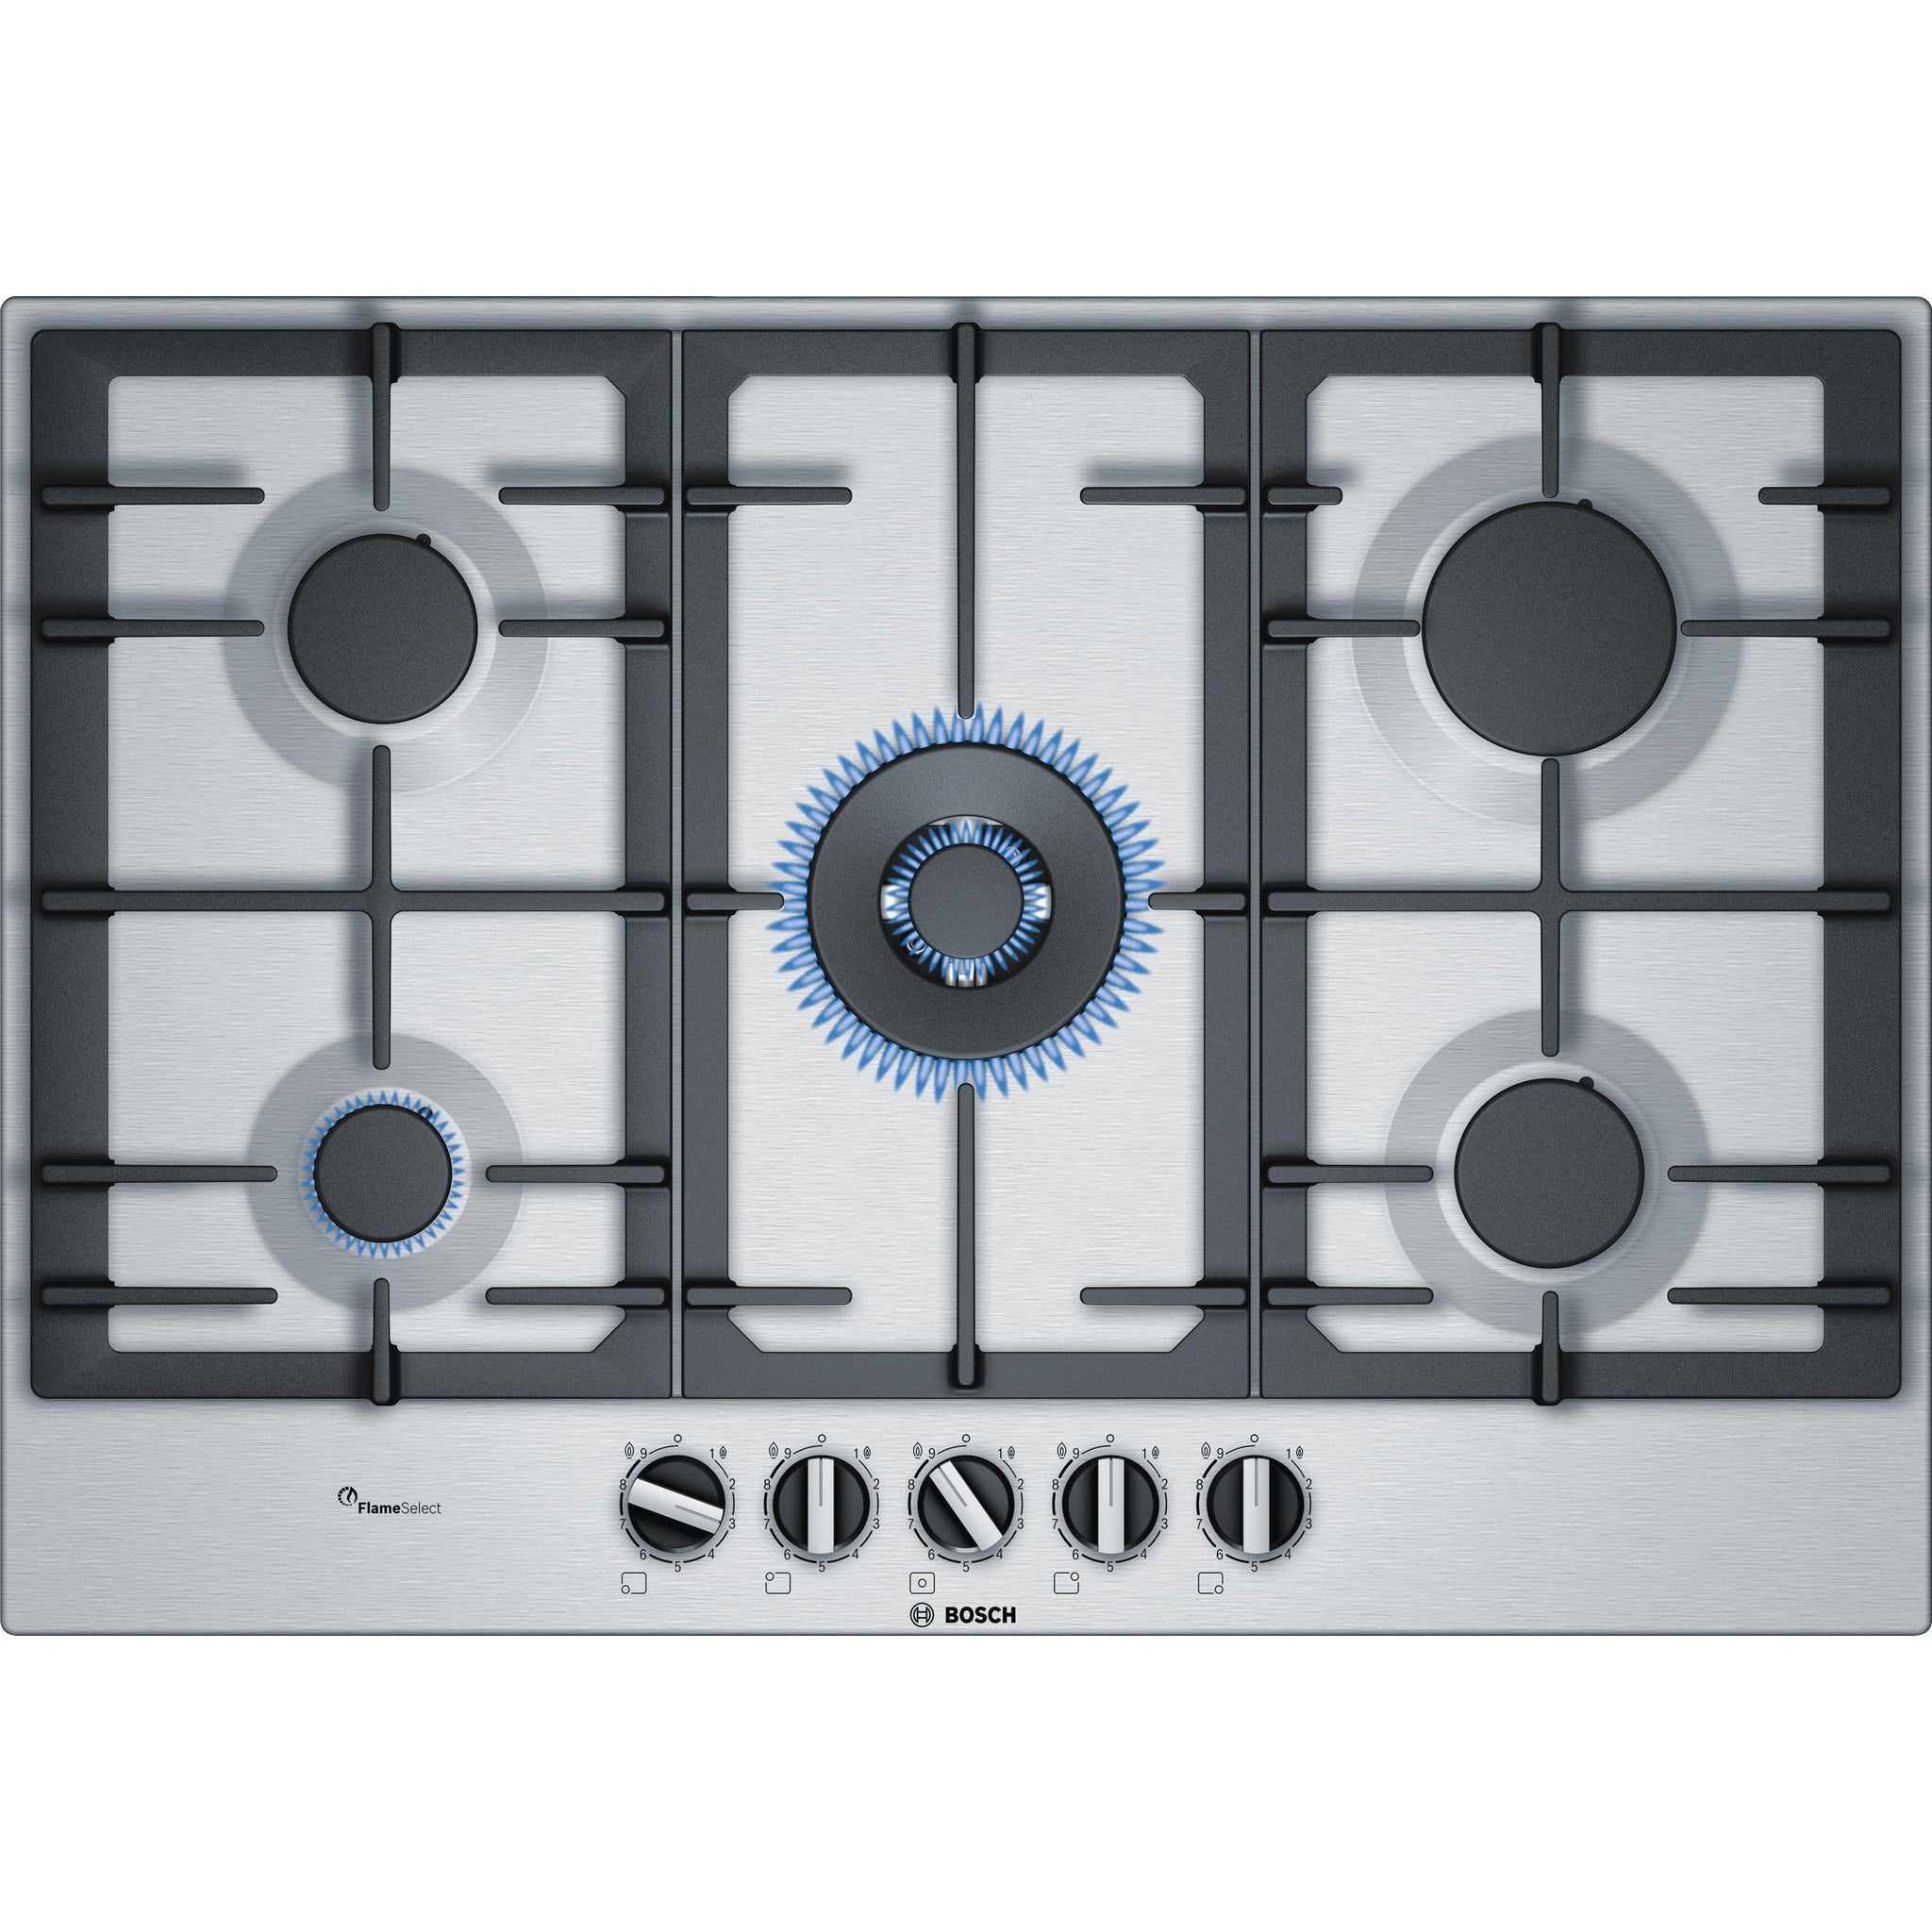 Bosch Serie 6 Pcq7a5b90 5 Burner Gas Hob Stainless Steel Exdisplay Model To Clear